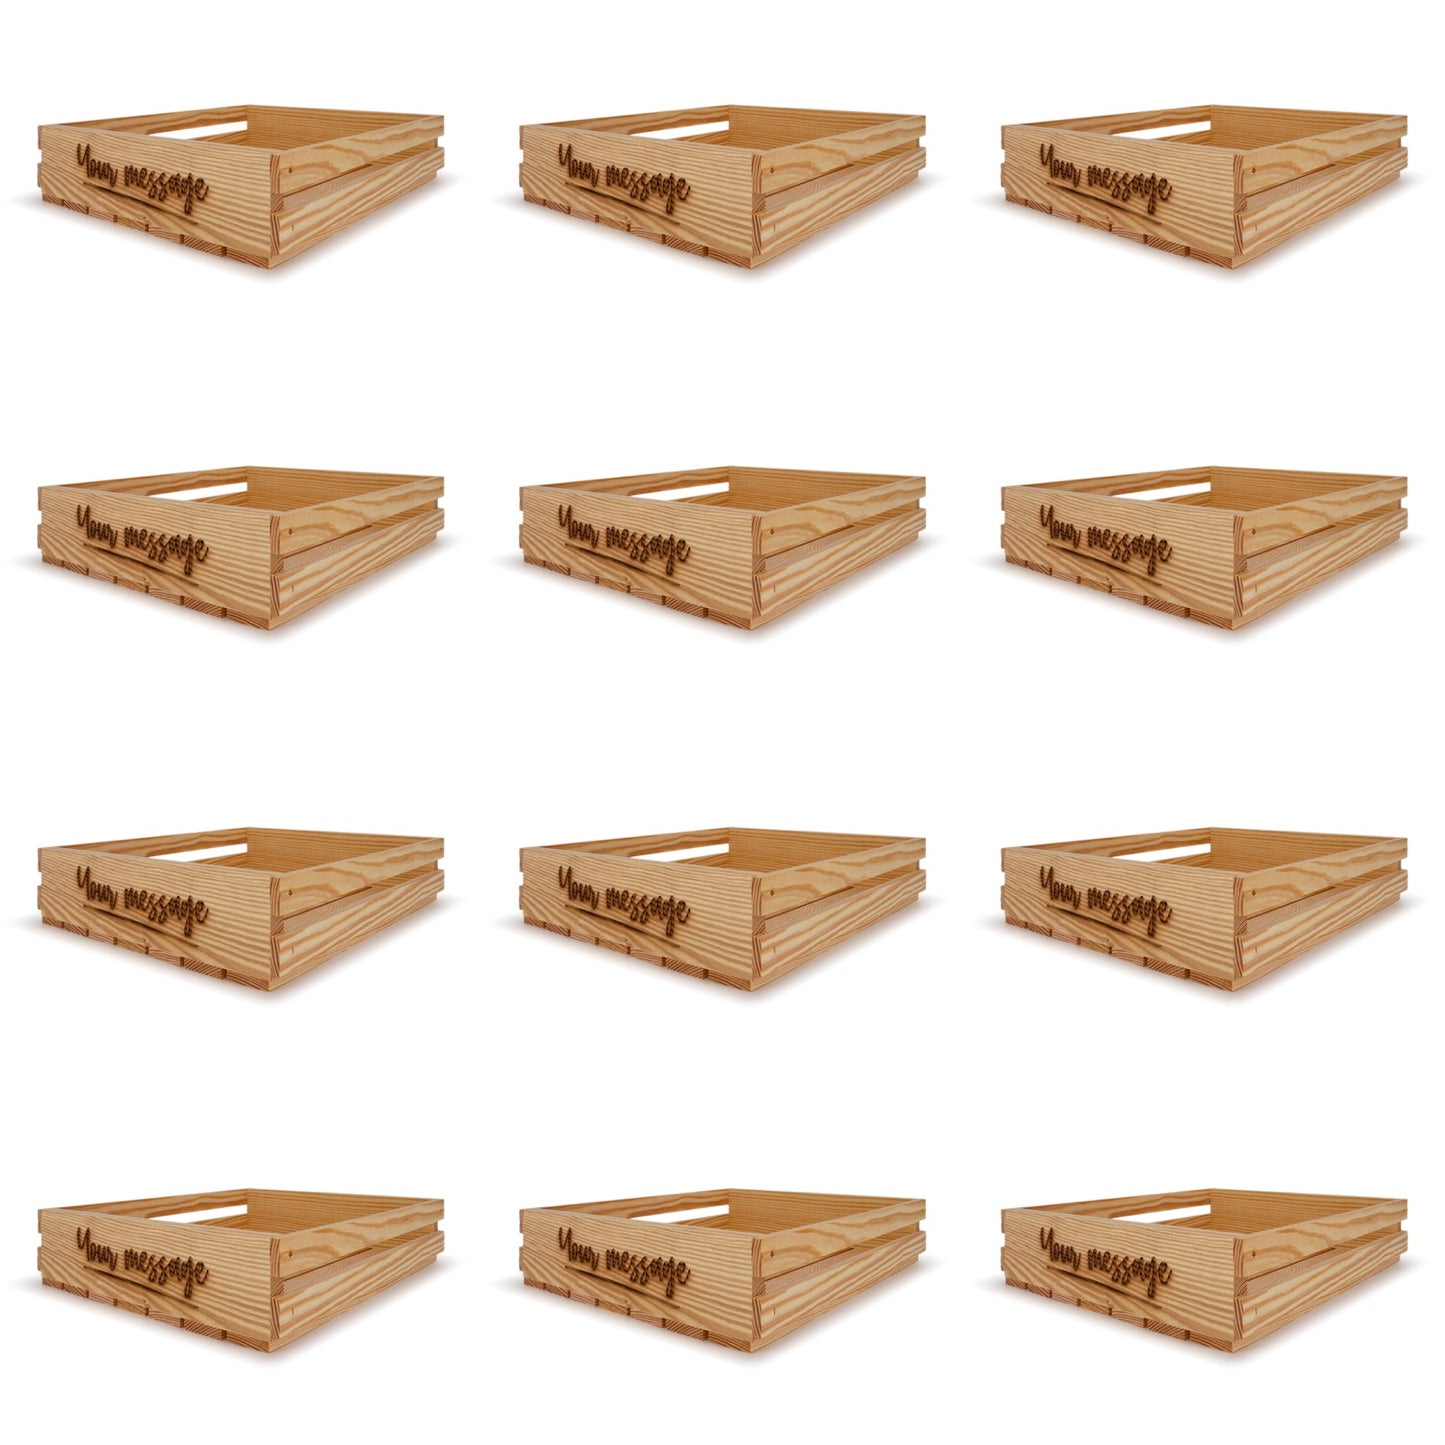 12 Small wooden crates 16x14x3.5 your message included